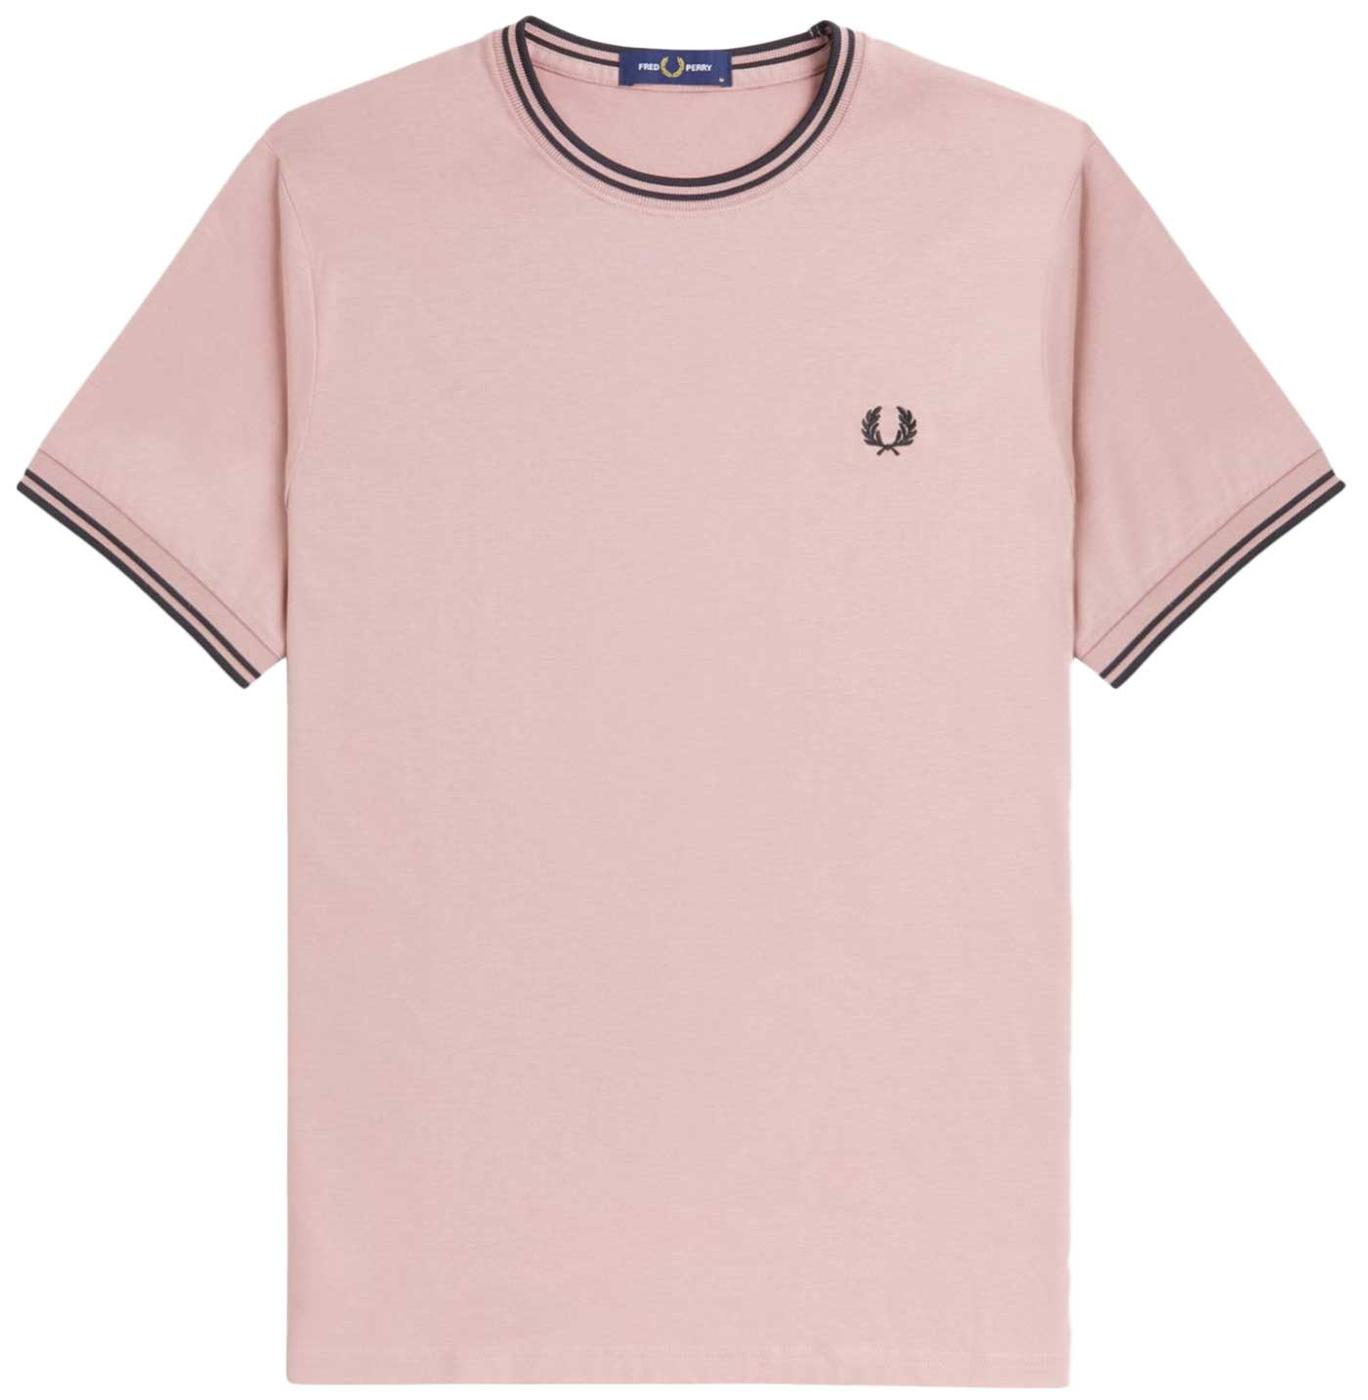 FRED PERRY M1588 Mod Twin Tipped T-Shirt Pink